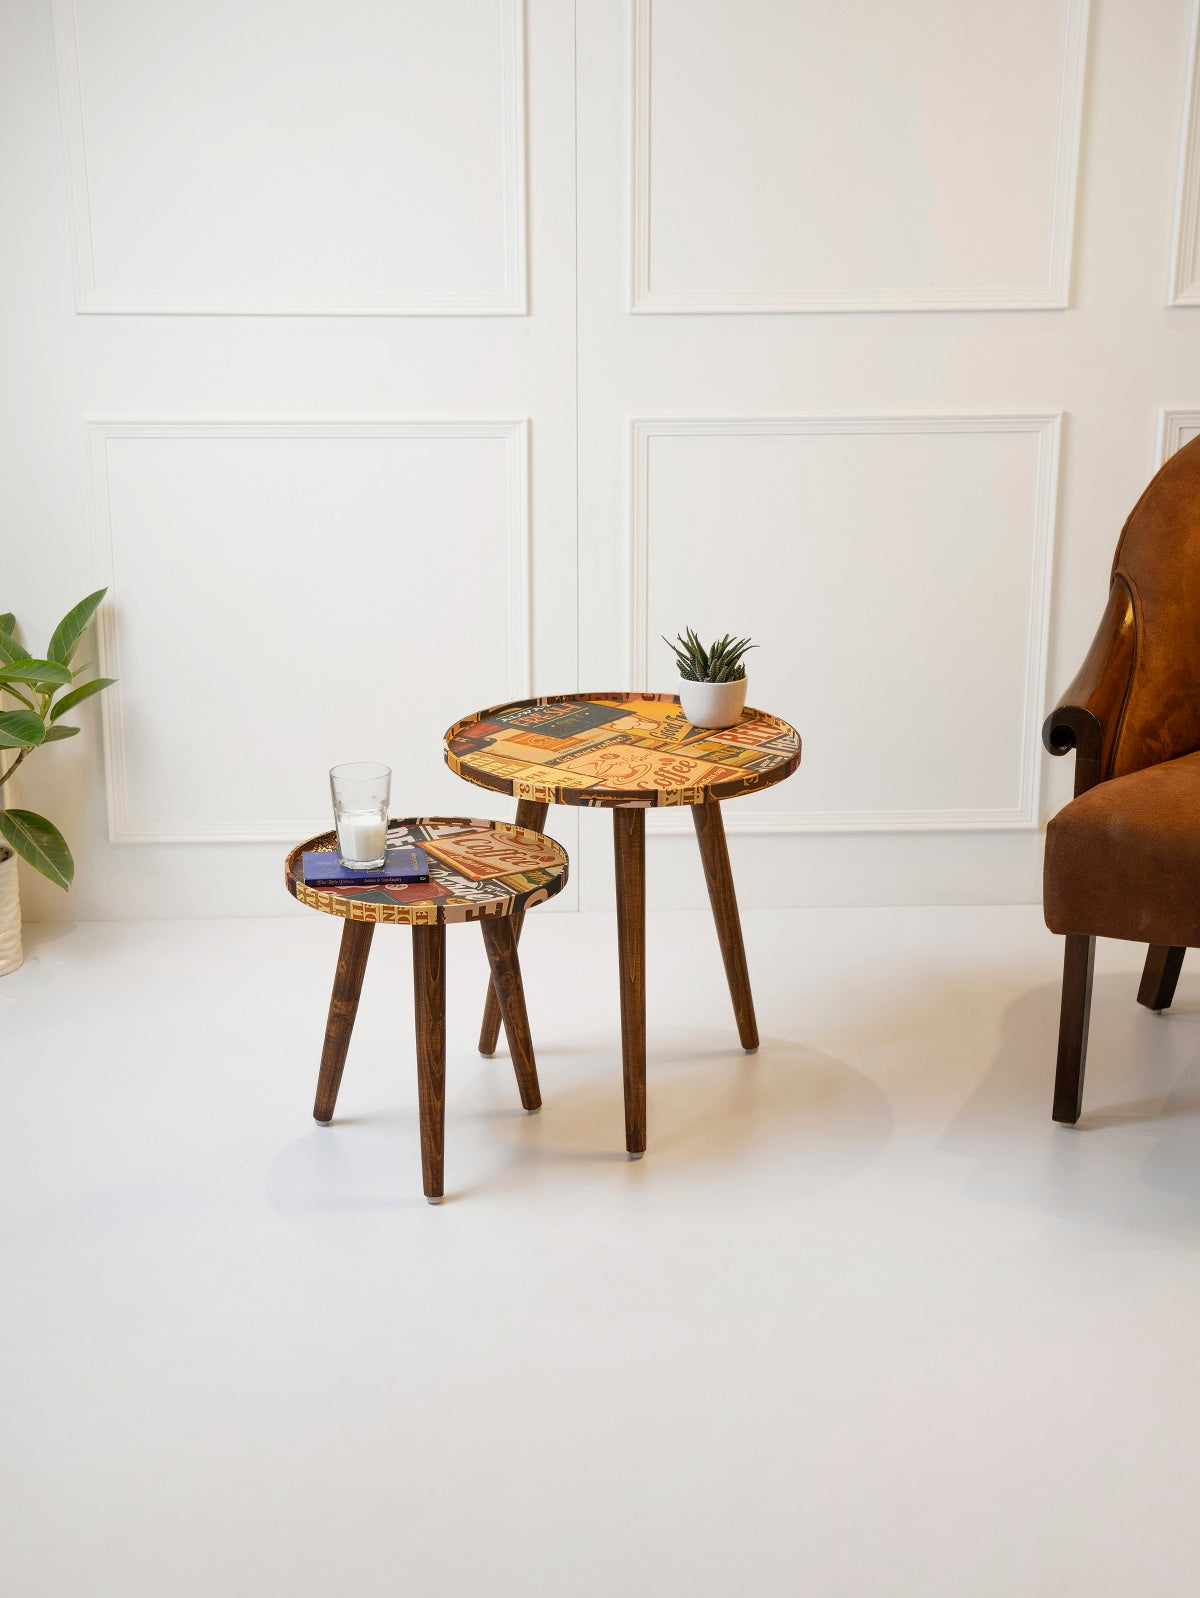 Crushing on Coffee Round Nesting Tables with Wooden Legs, Side Tables, Wooden Tables, Living Room Decor by A Tiny Mistake